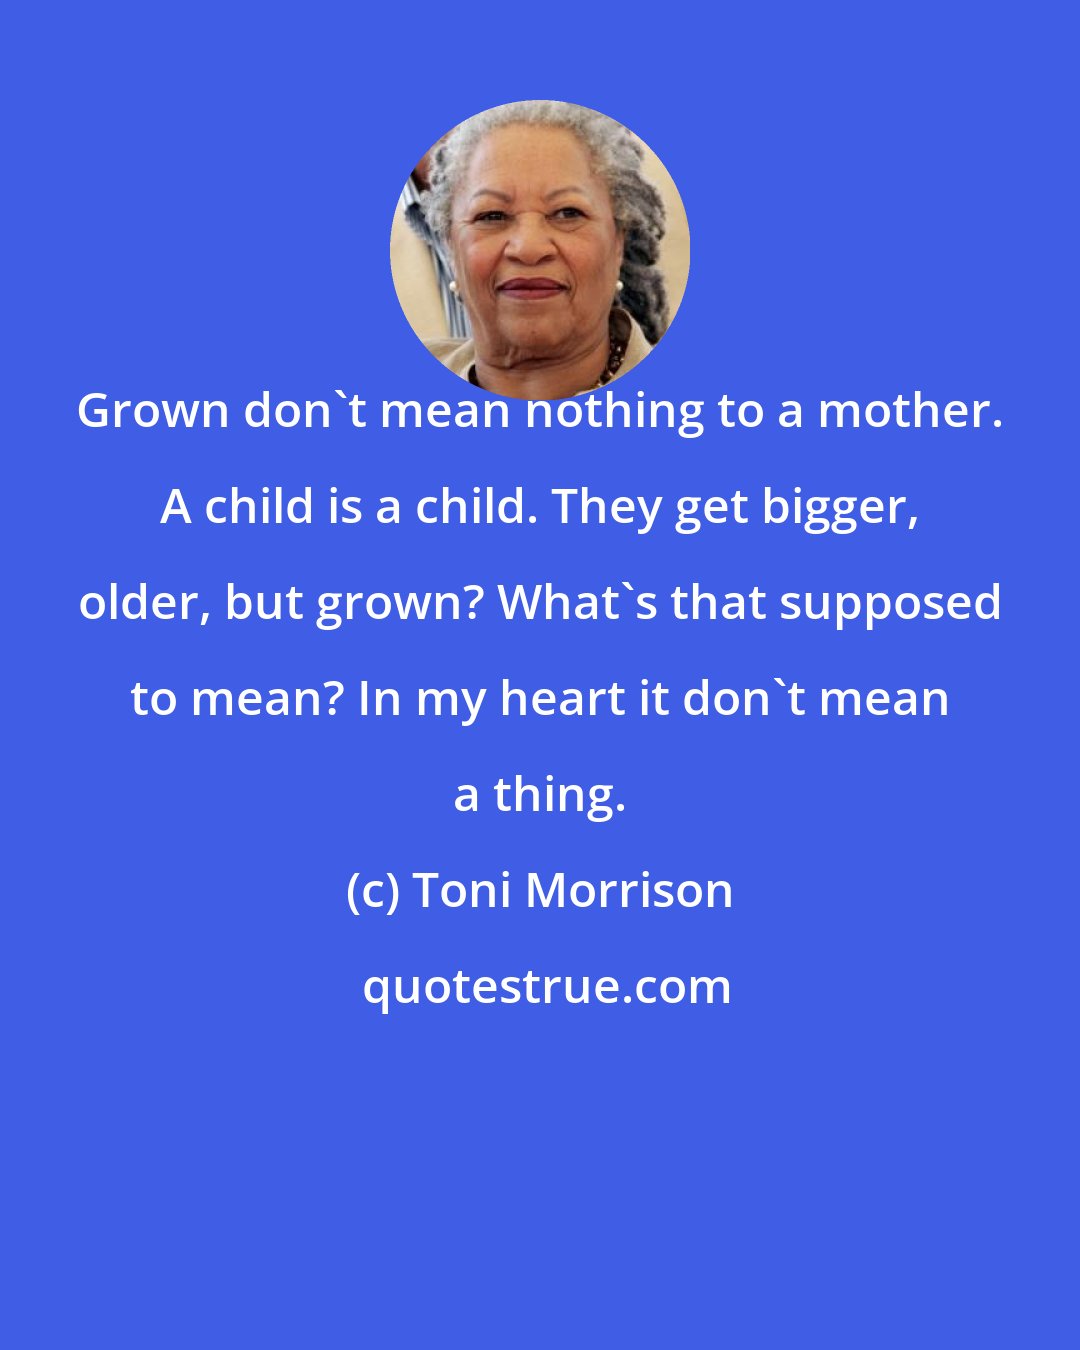 Toni Morrison: Grown don't mean nothing to a mother. A child is a child. They get bigger, older, but grown? What's that supposed to mean? In my heart it don't mean a thing.